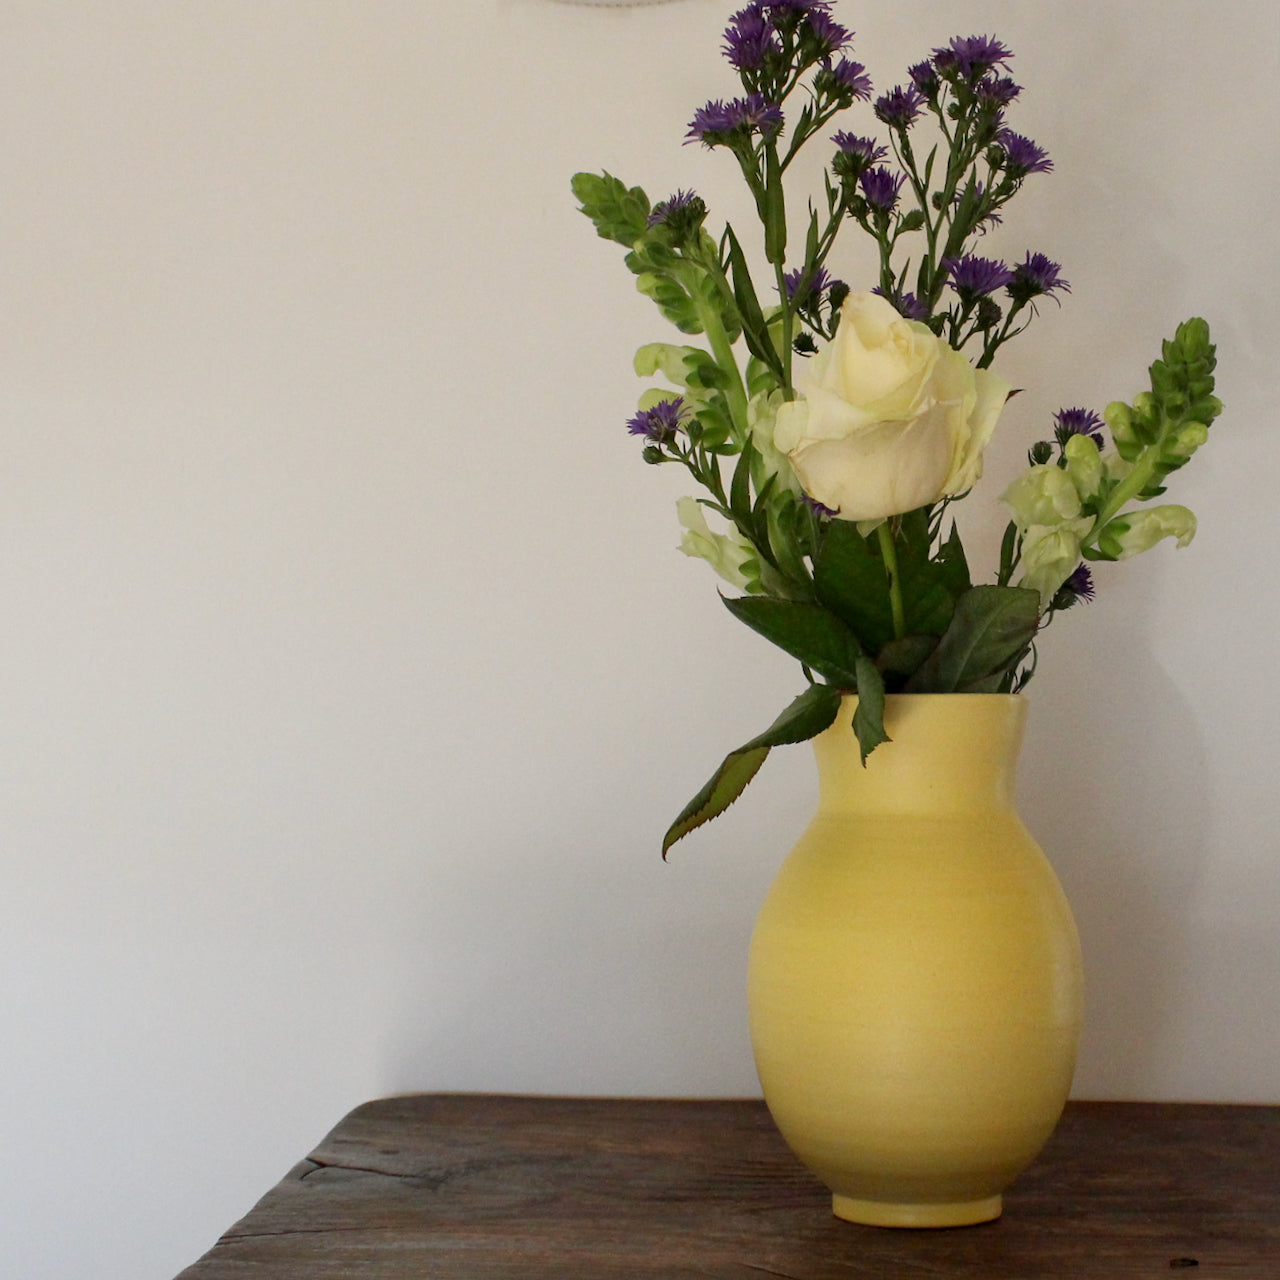 yellow vase by UK ceramic artist Lucy Burley  with green, white and purple flowers in it